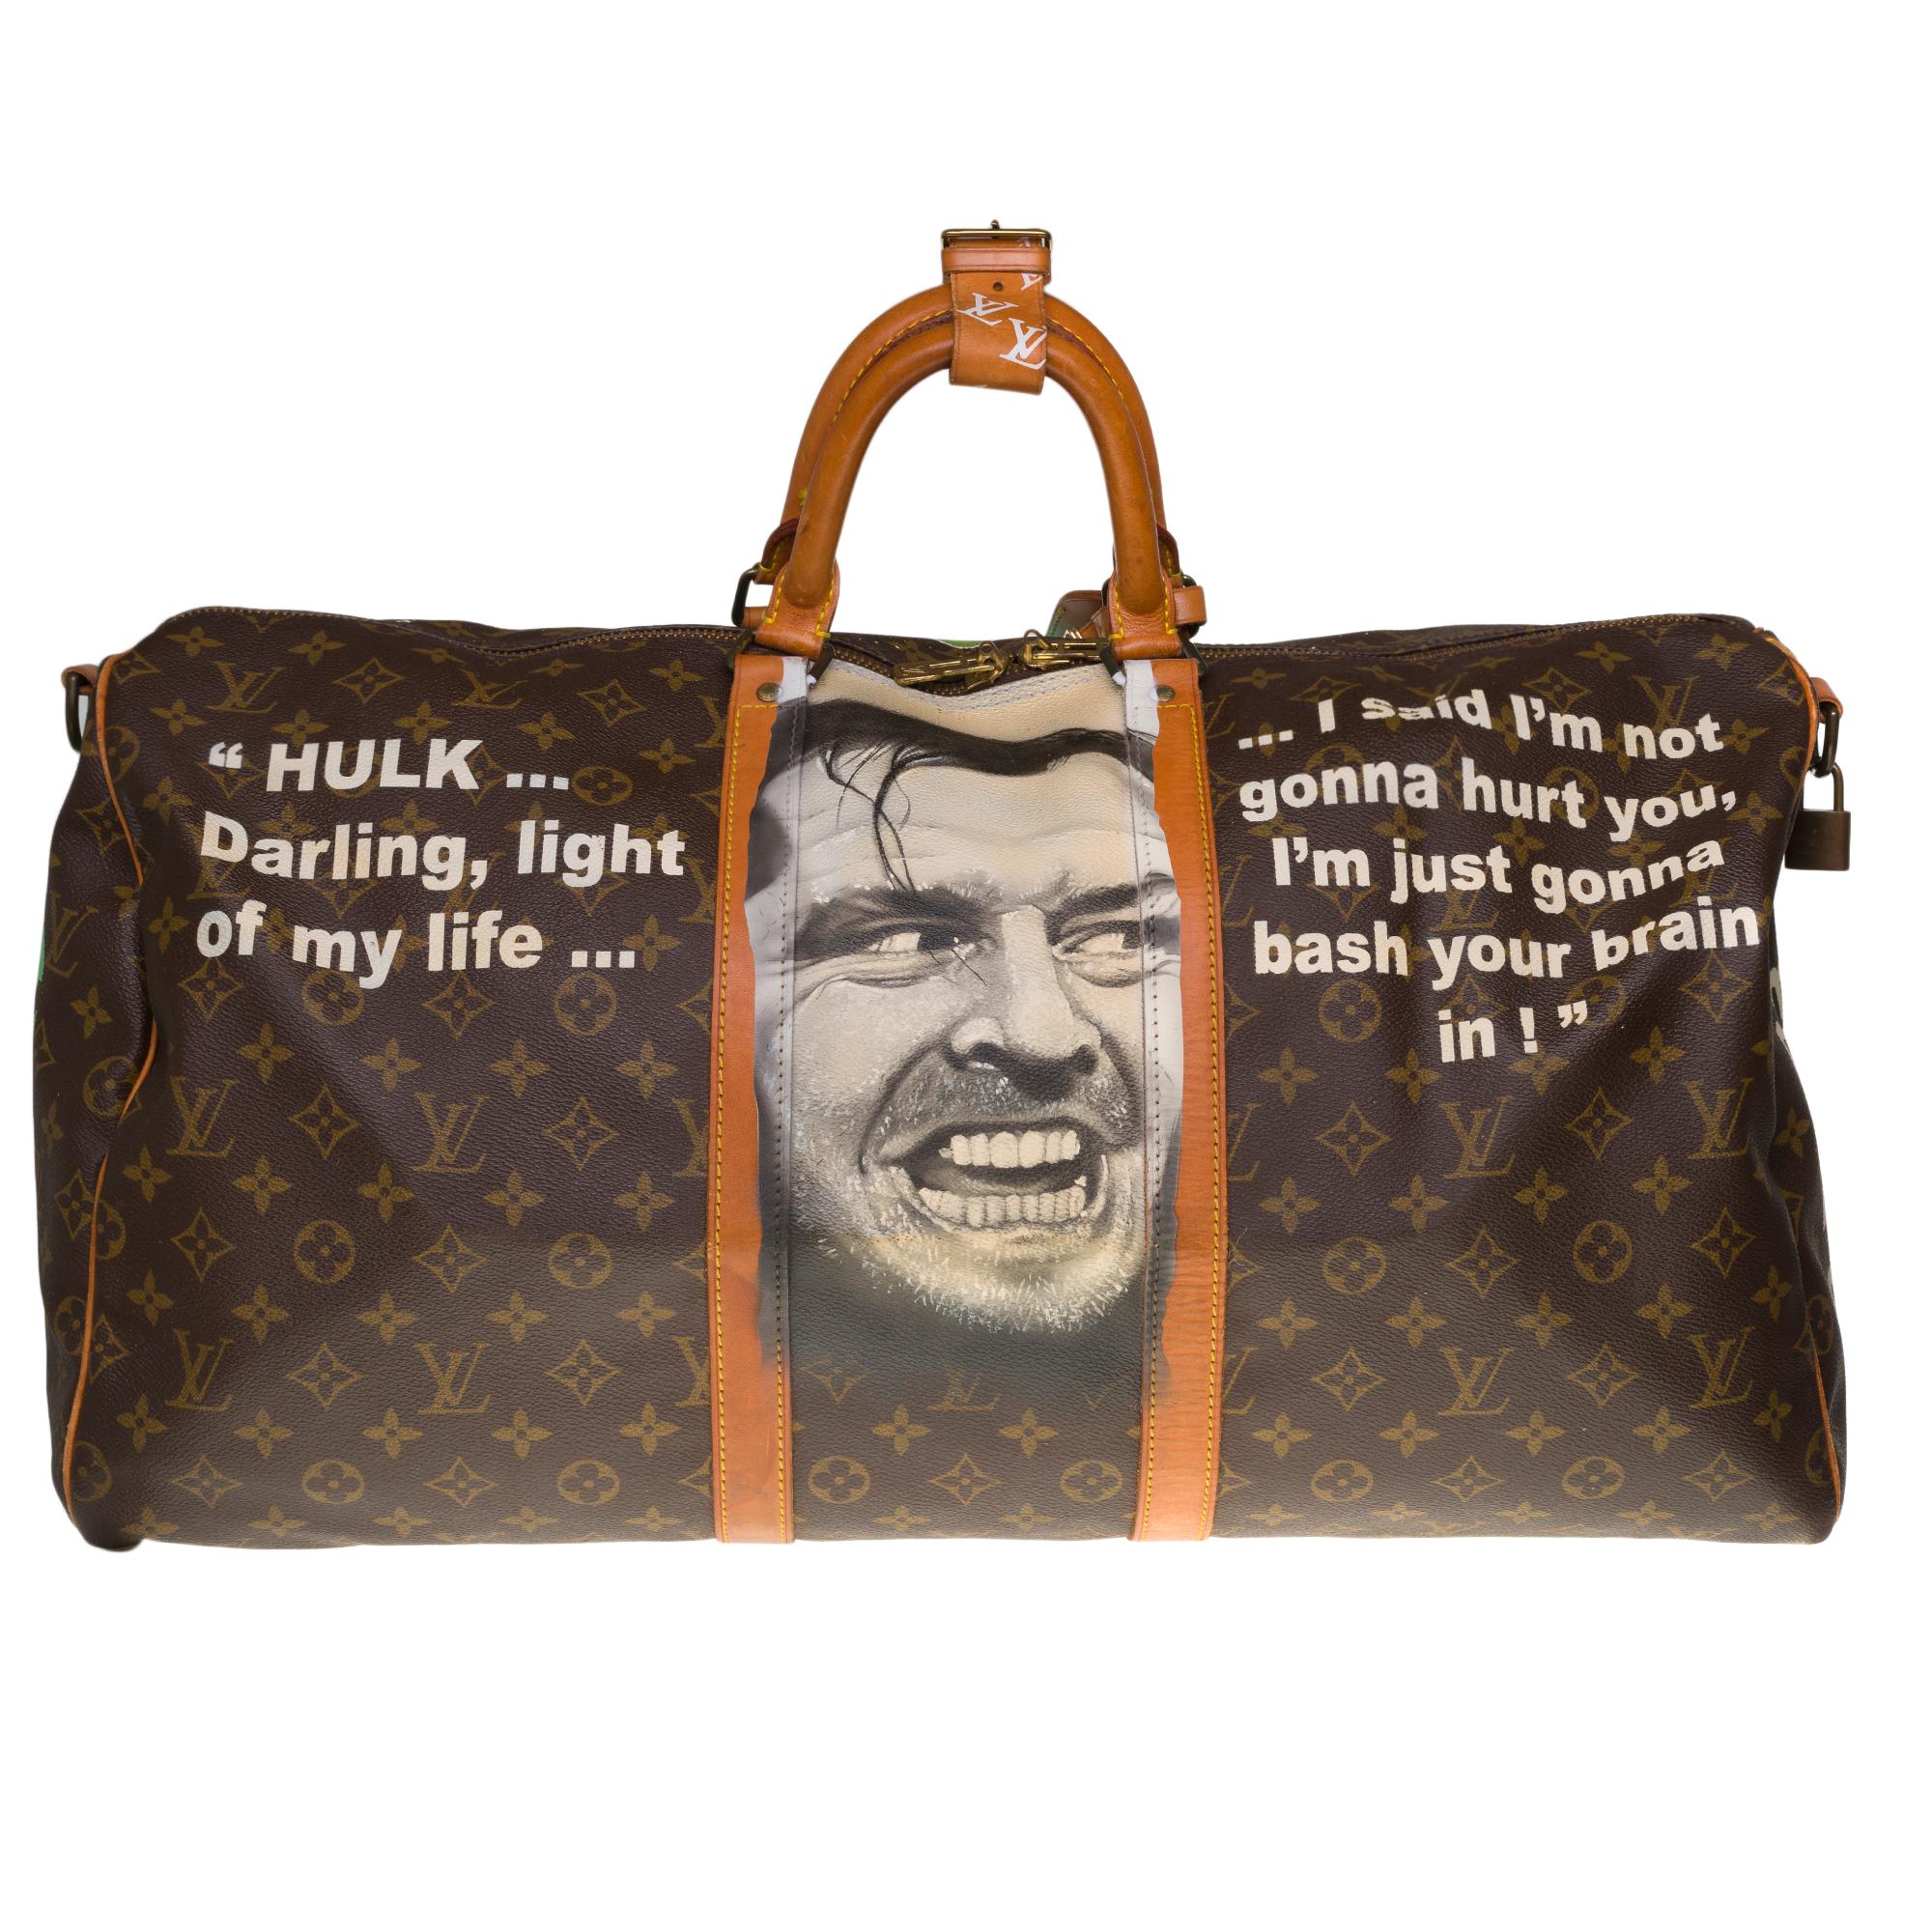 Beautiful travel bag Louis Vuitton Keepall 55 cm strap in Monogram canvas customized by the popular artist of Street Art PatBo on the theme 